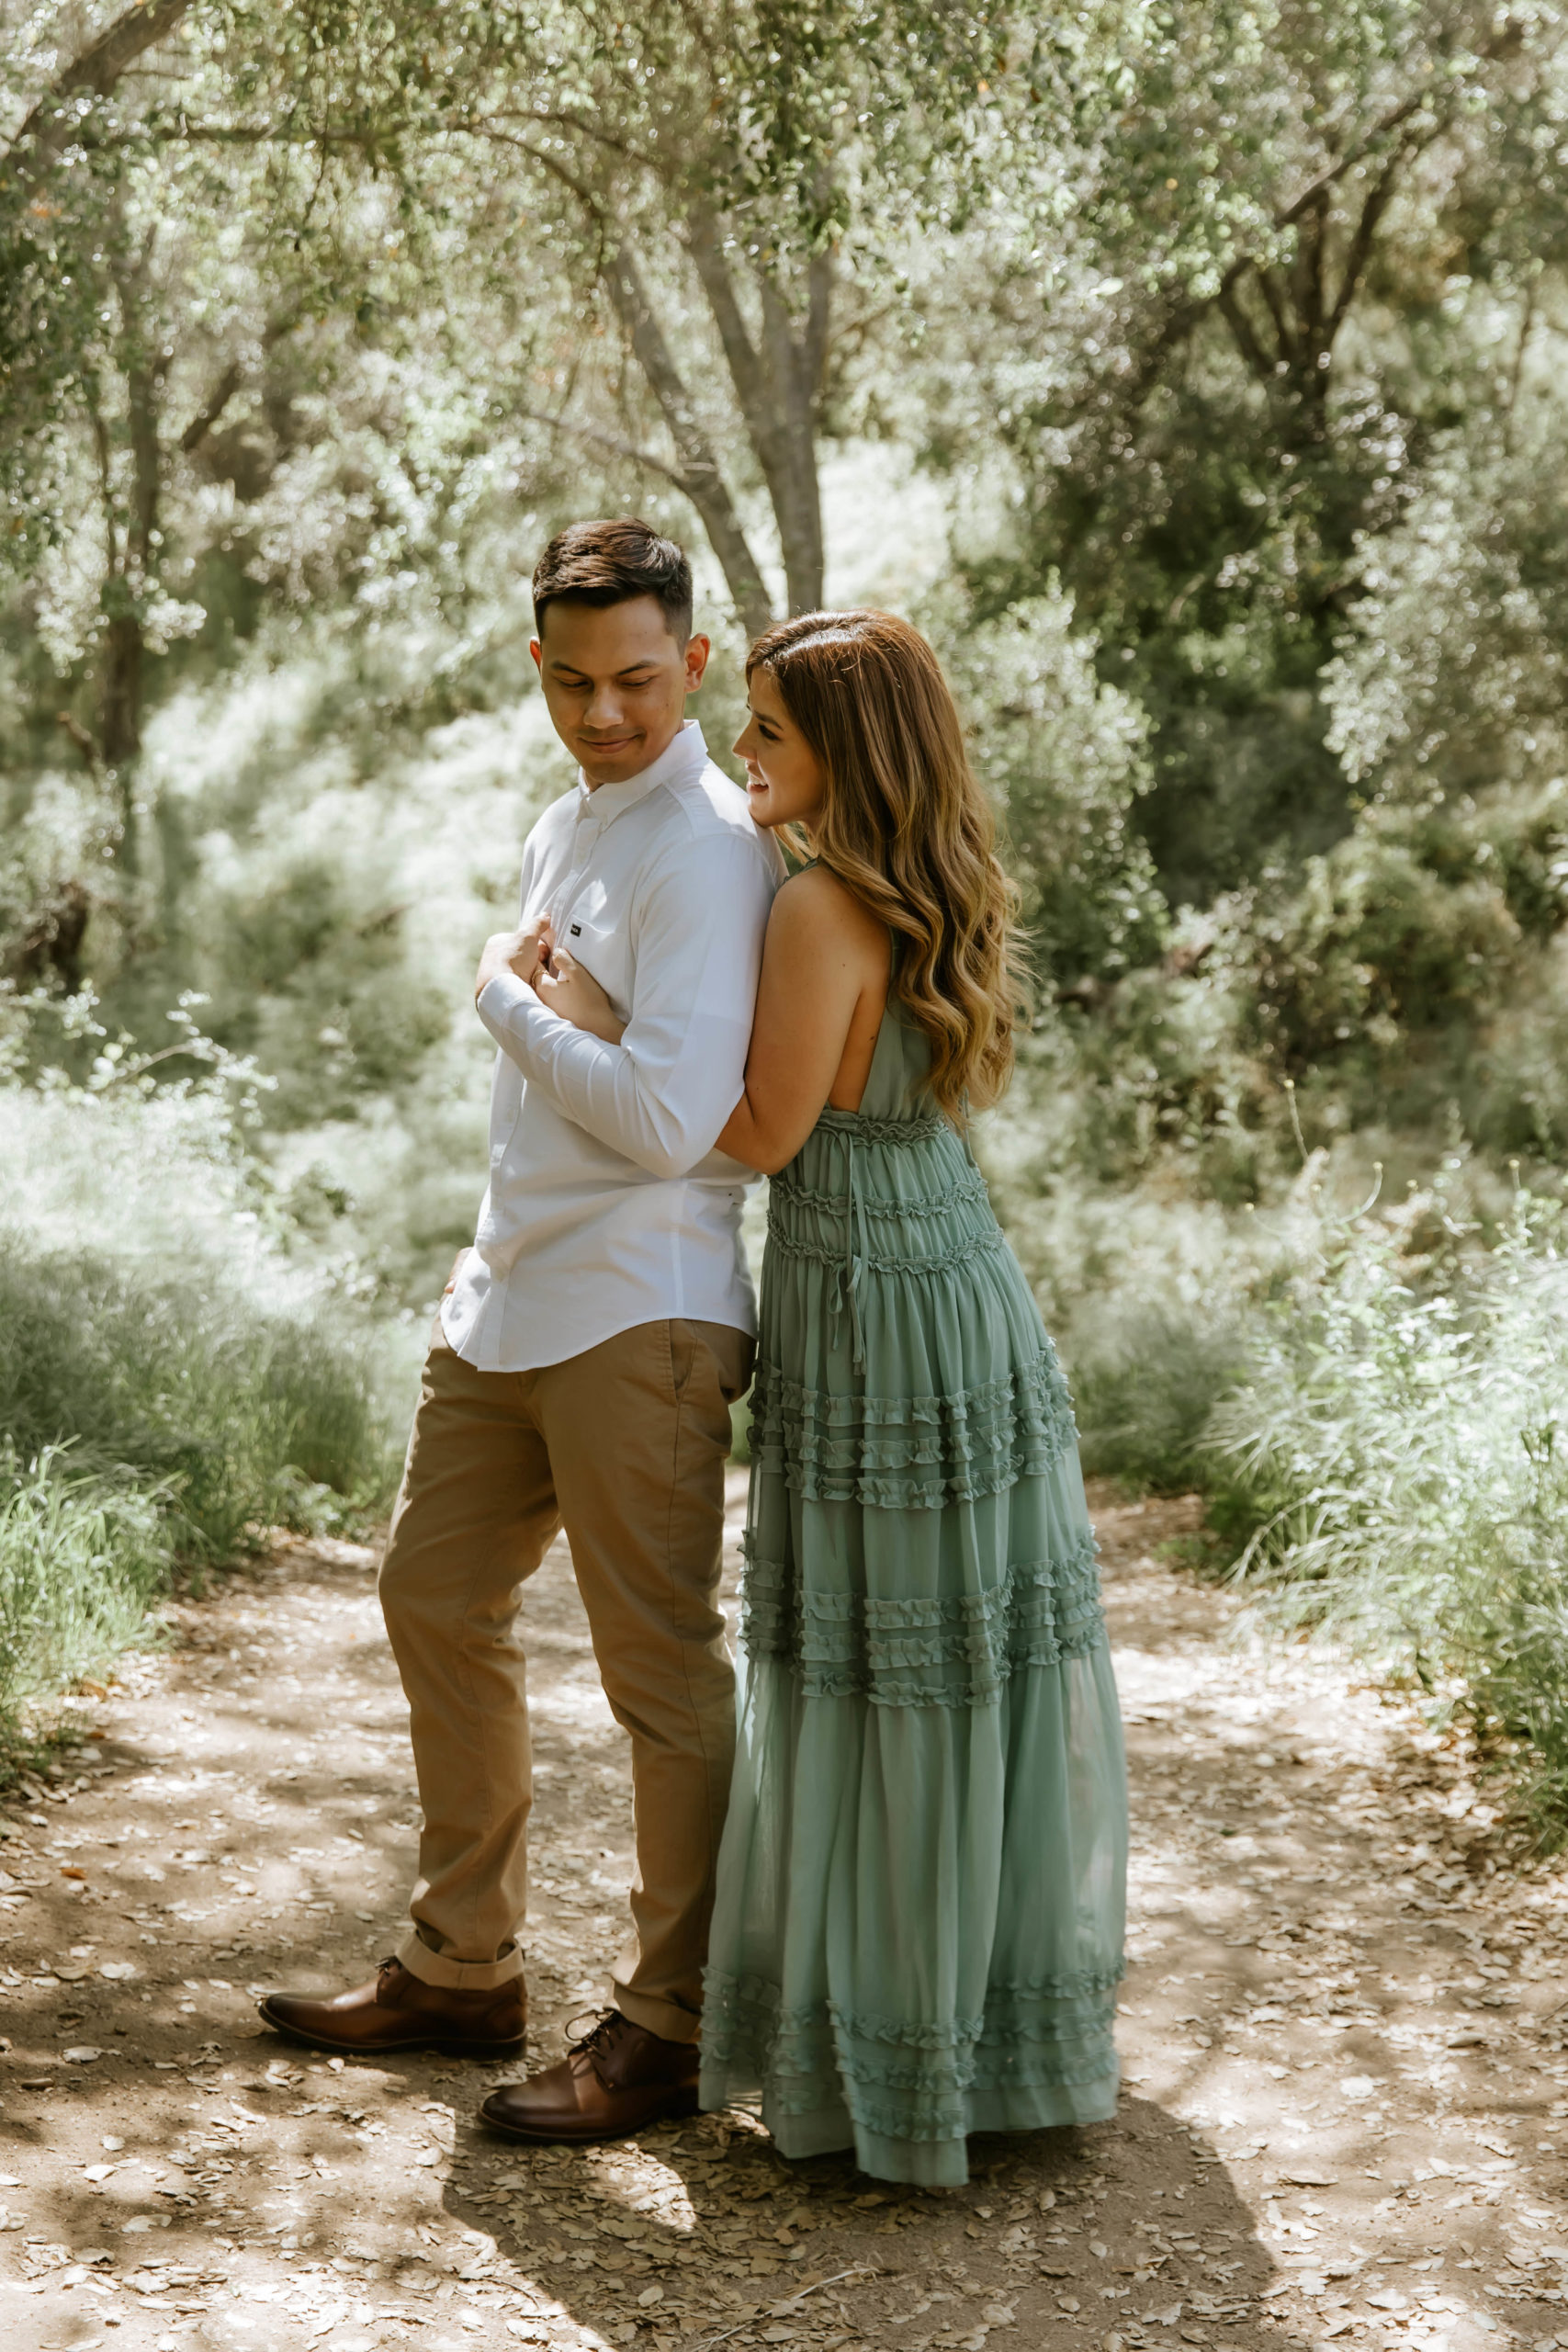 finacee hugging fiance from behind. during their engagement photos